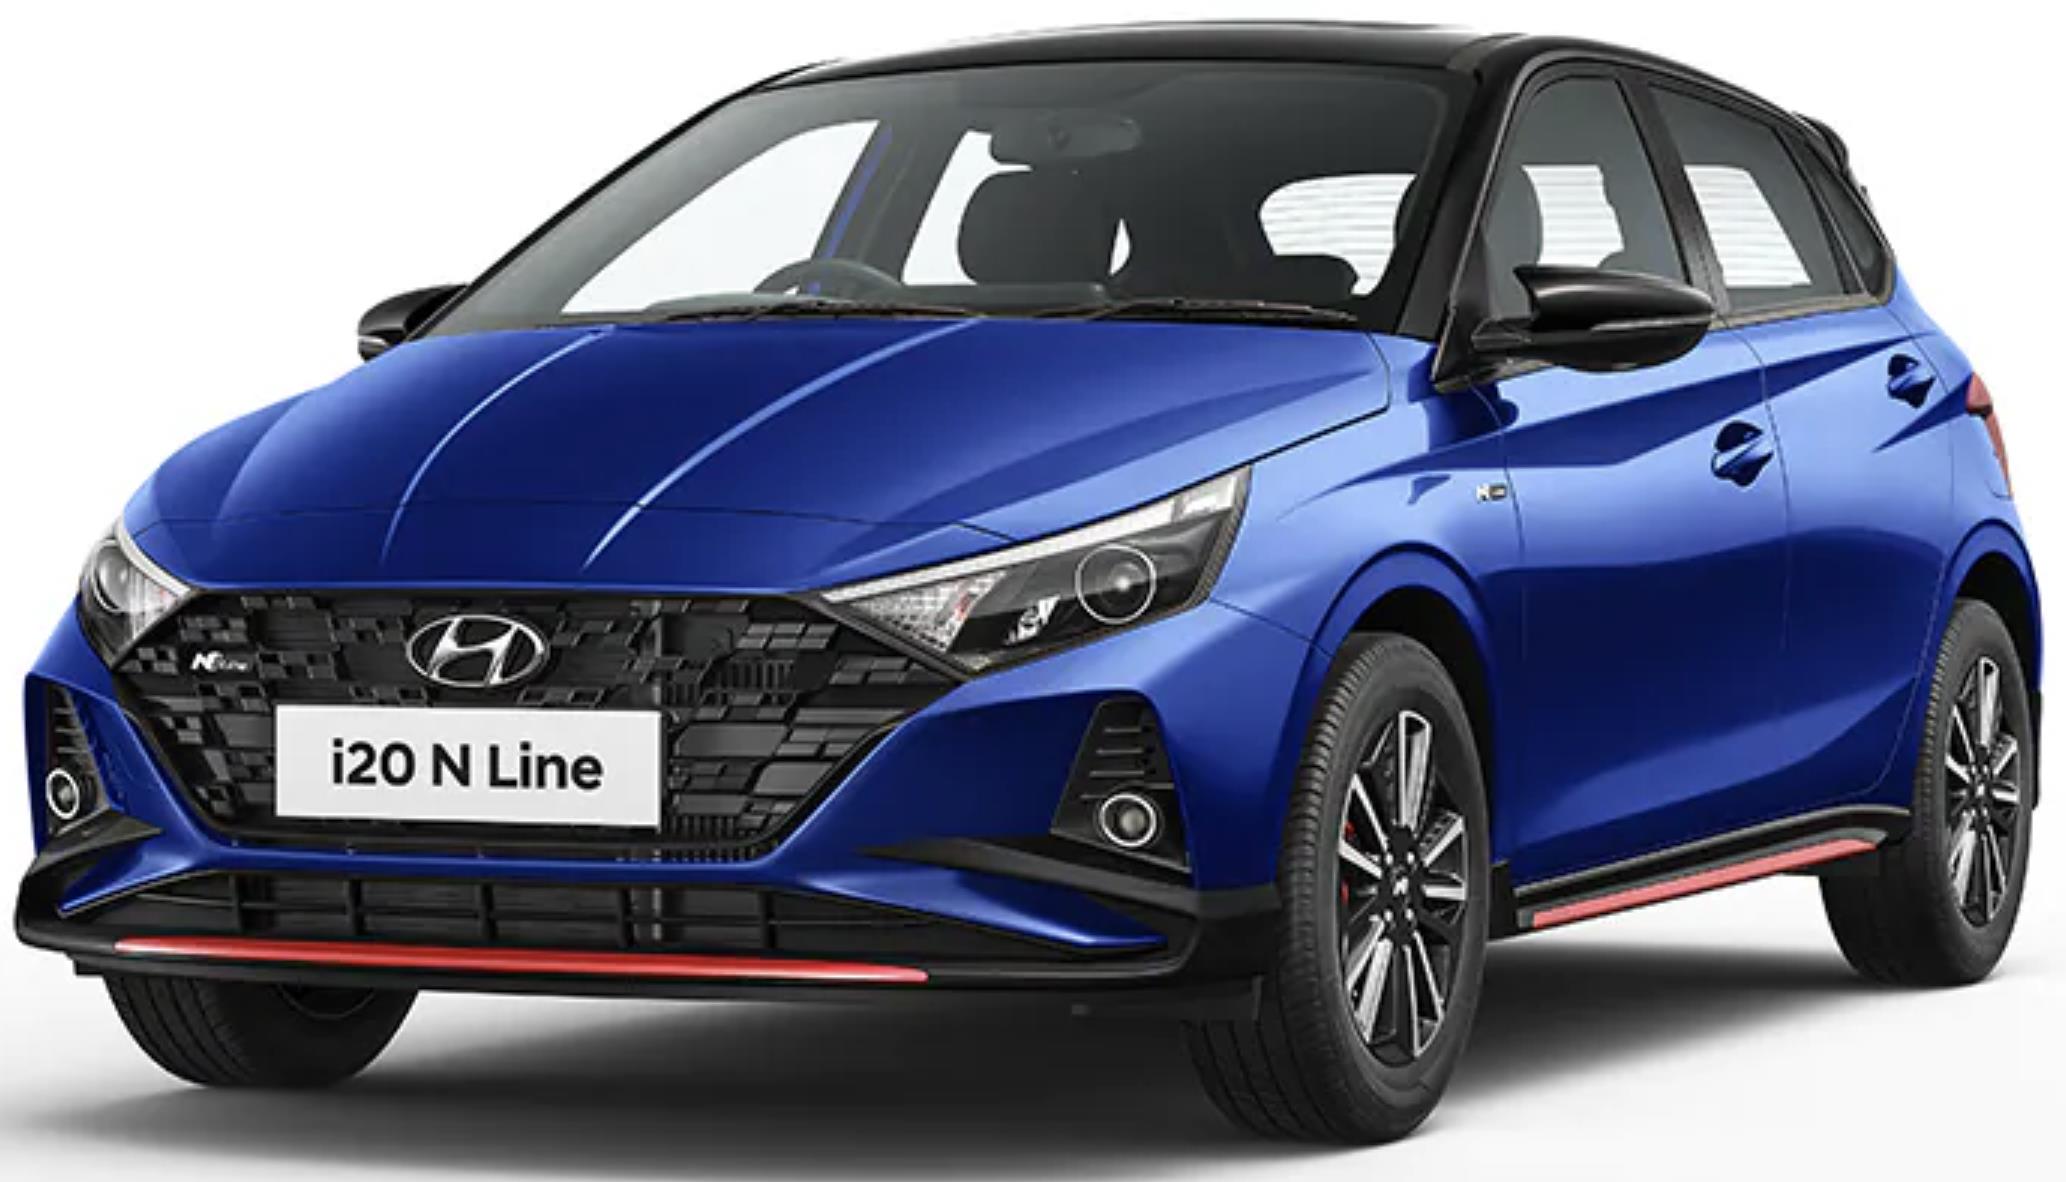 Hyundai i20 N Line Car Mileage, Engine, Price, Space, Safety and Features